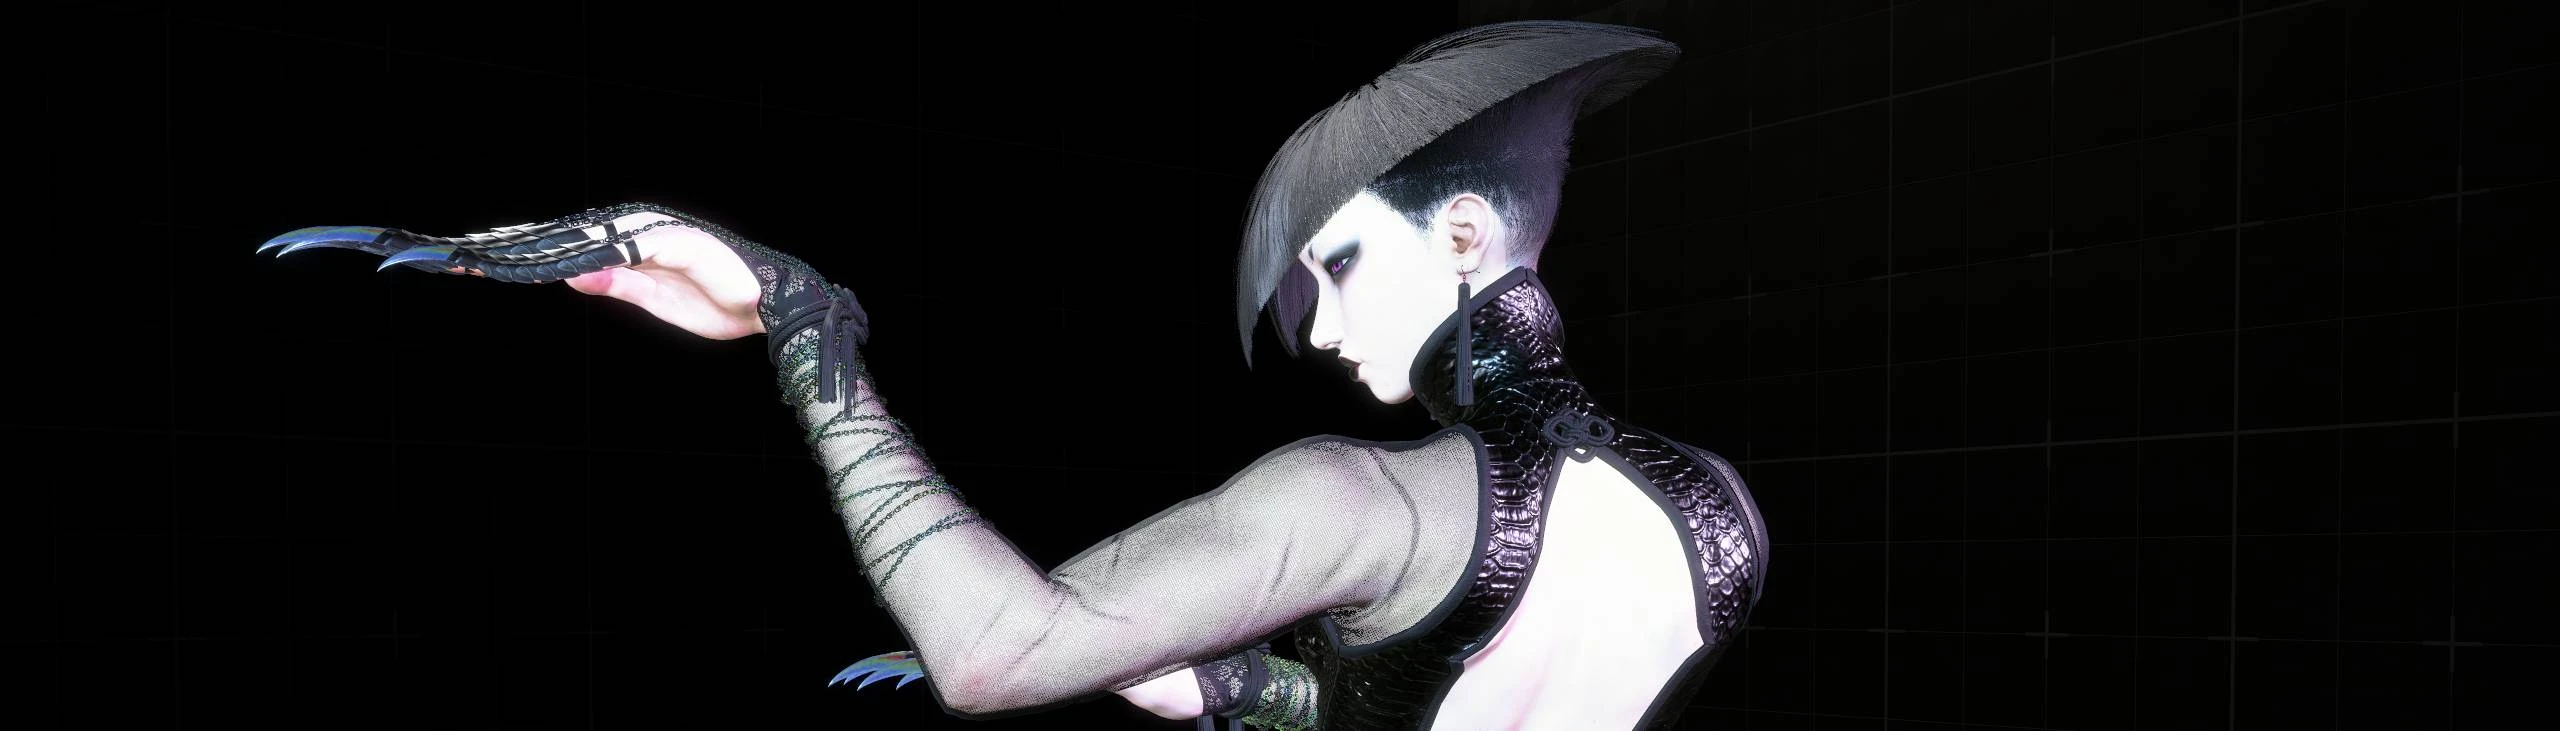 Street Fighter 6's A.K.I. goes full sexy goth in this sinister new